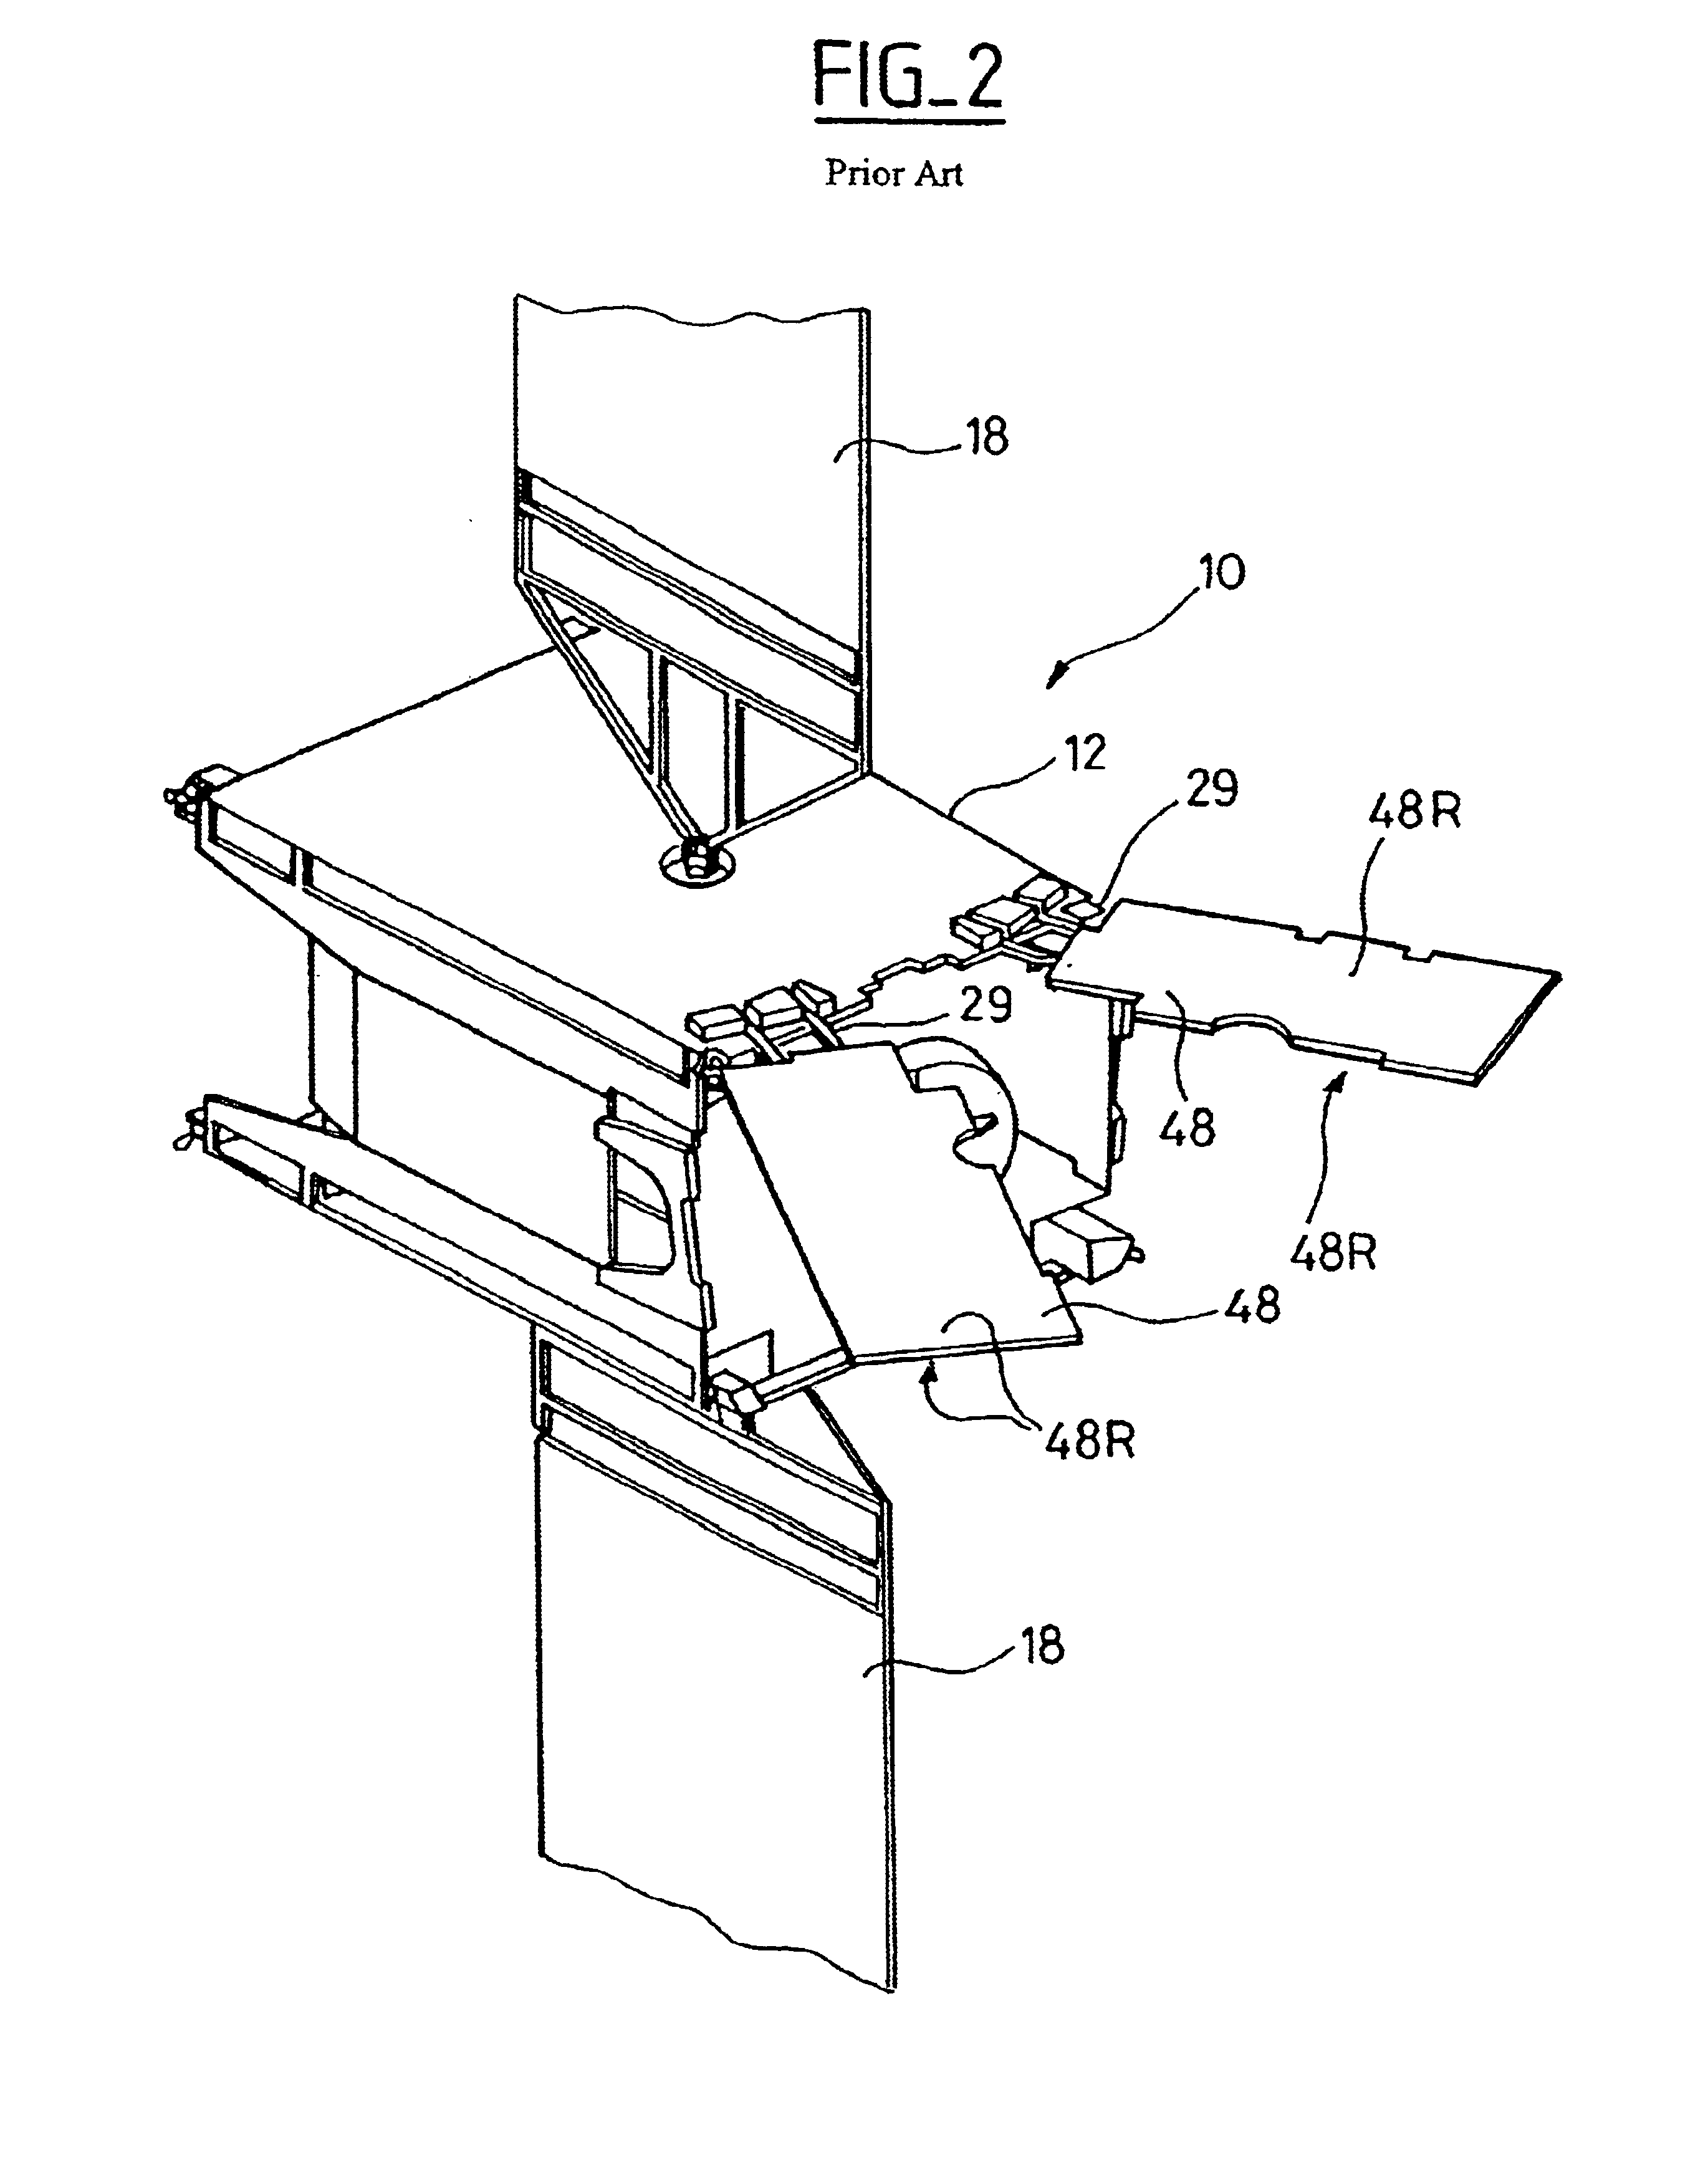 Deployable radiator for a space vehicle